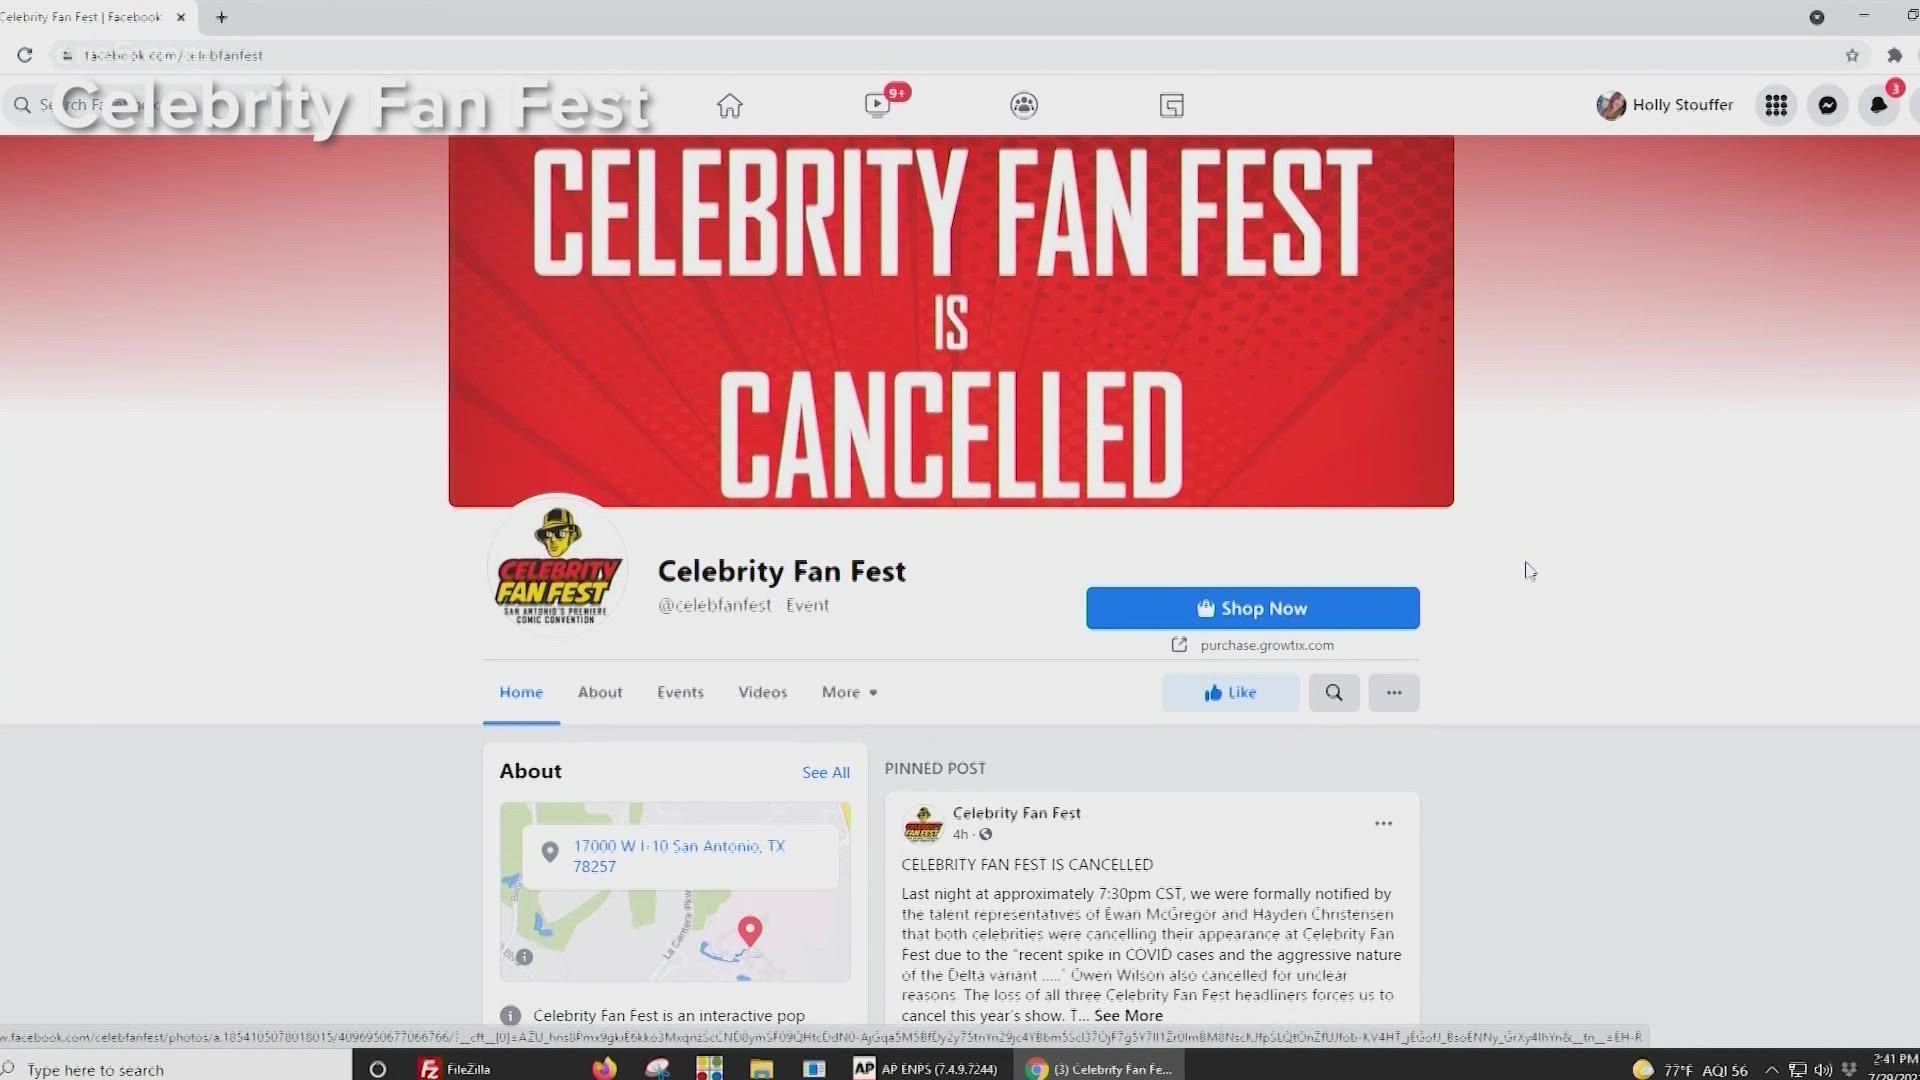 "The loss of all three Celebrity Fan Fest headliners forces us to cancel this year’s show."